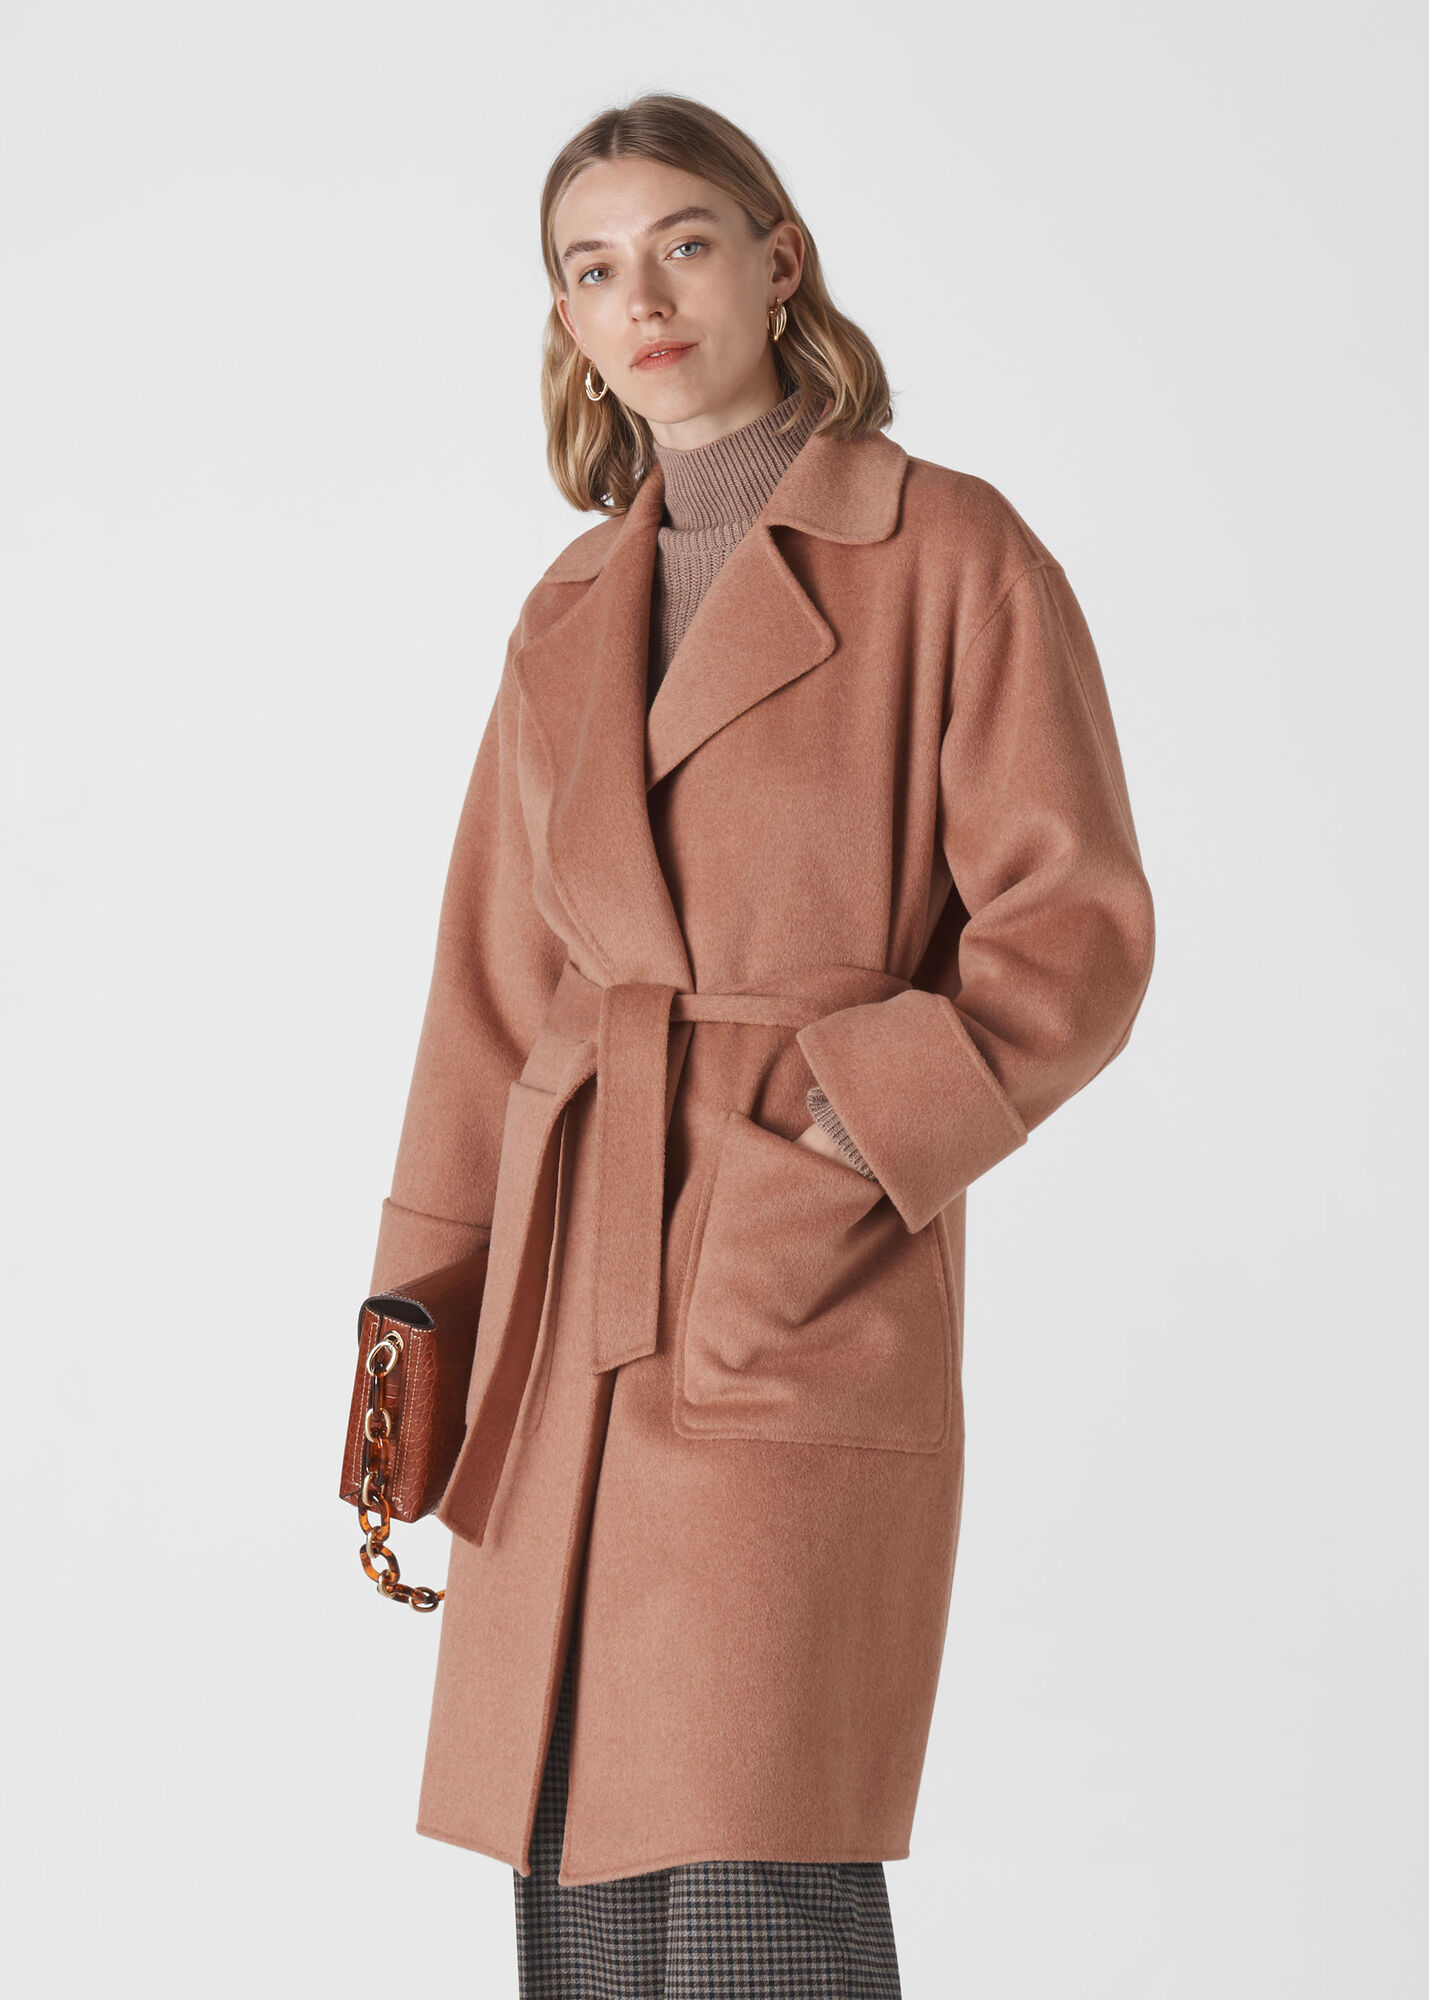 Pale Pink Double Faced Wool Wrap Coat | WHISTLES | Whistles UK